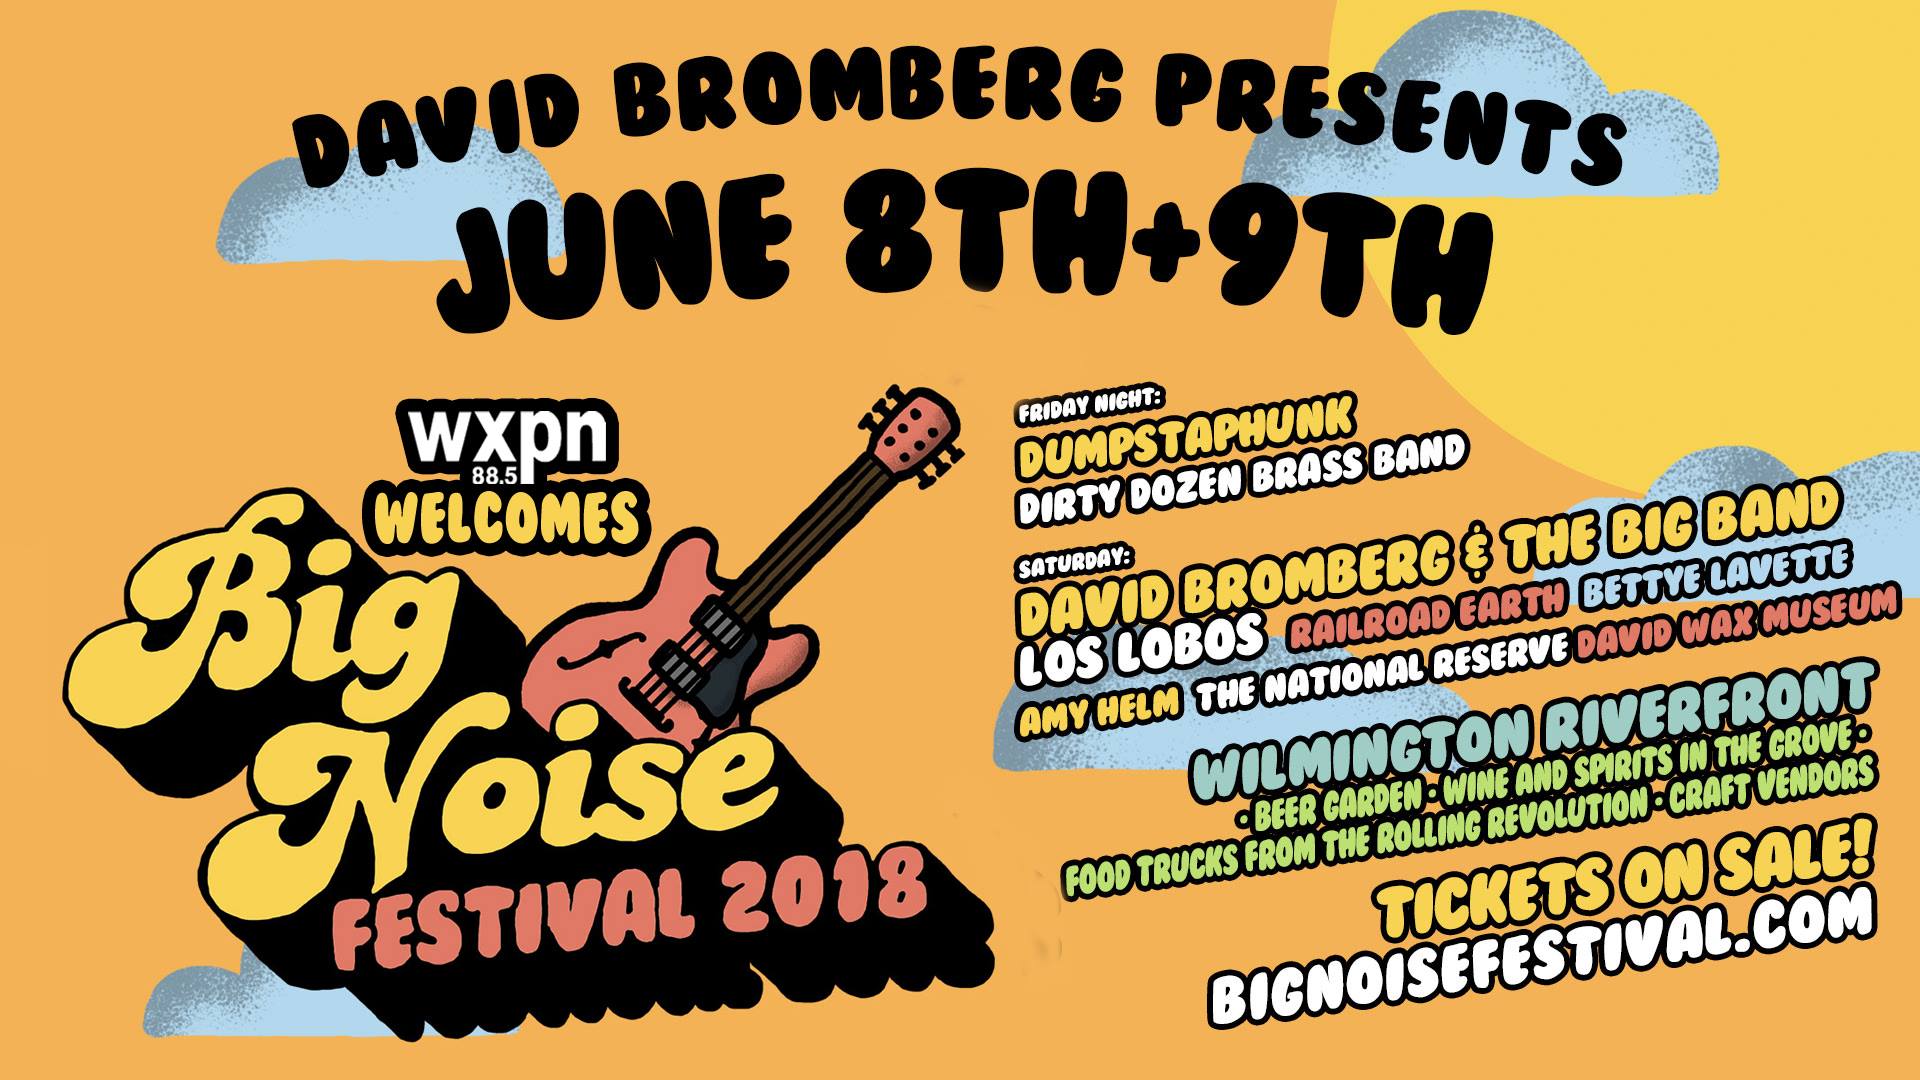 ResideBPG Residents Receive 50% Off Big Noise Music Festival Tickets!